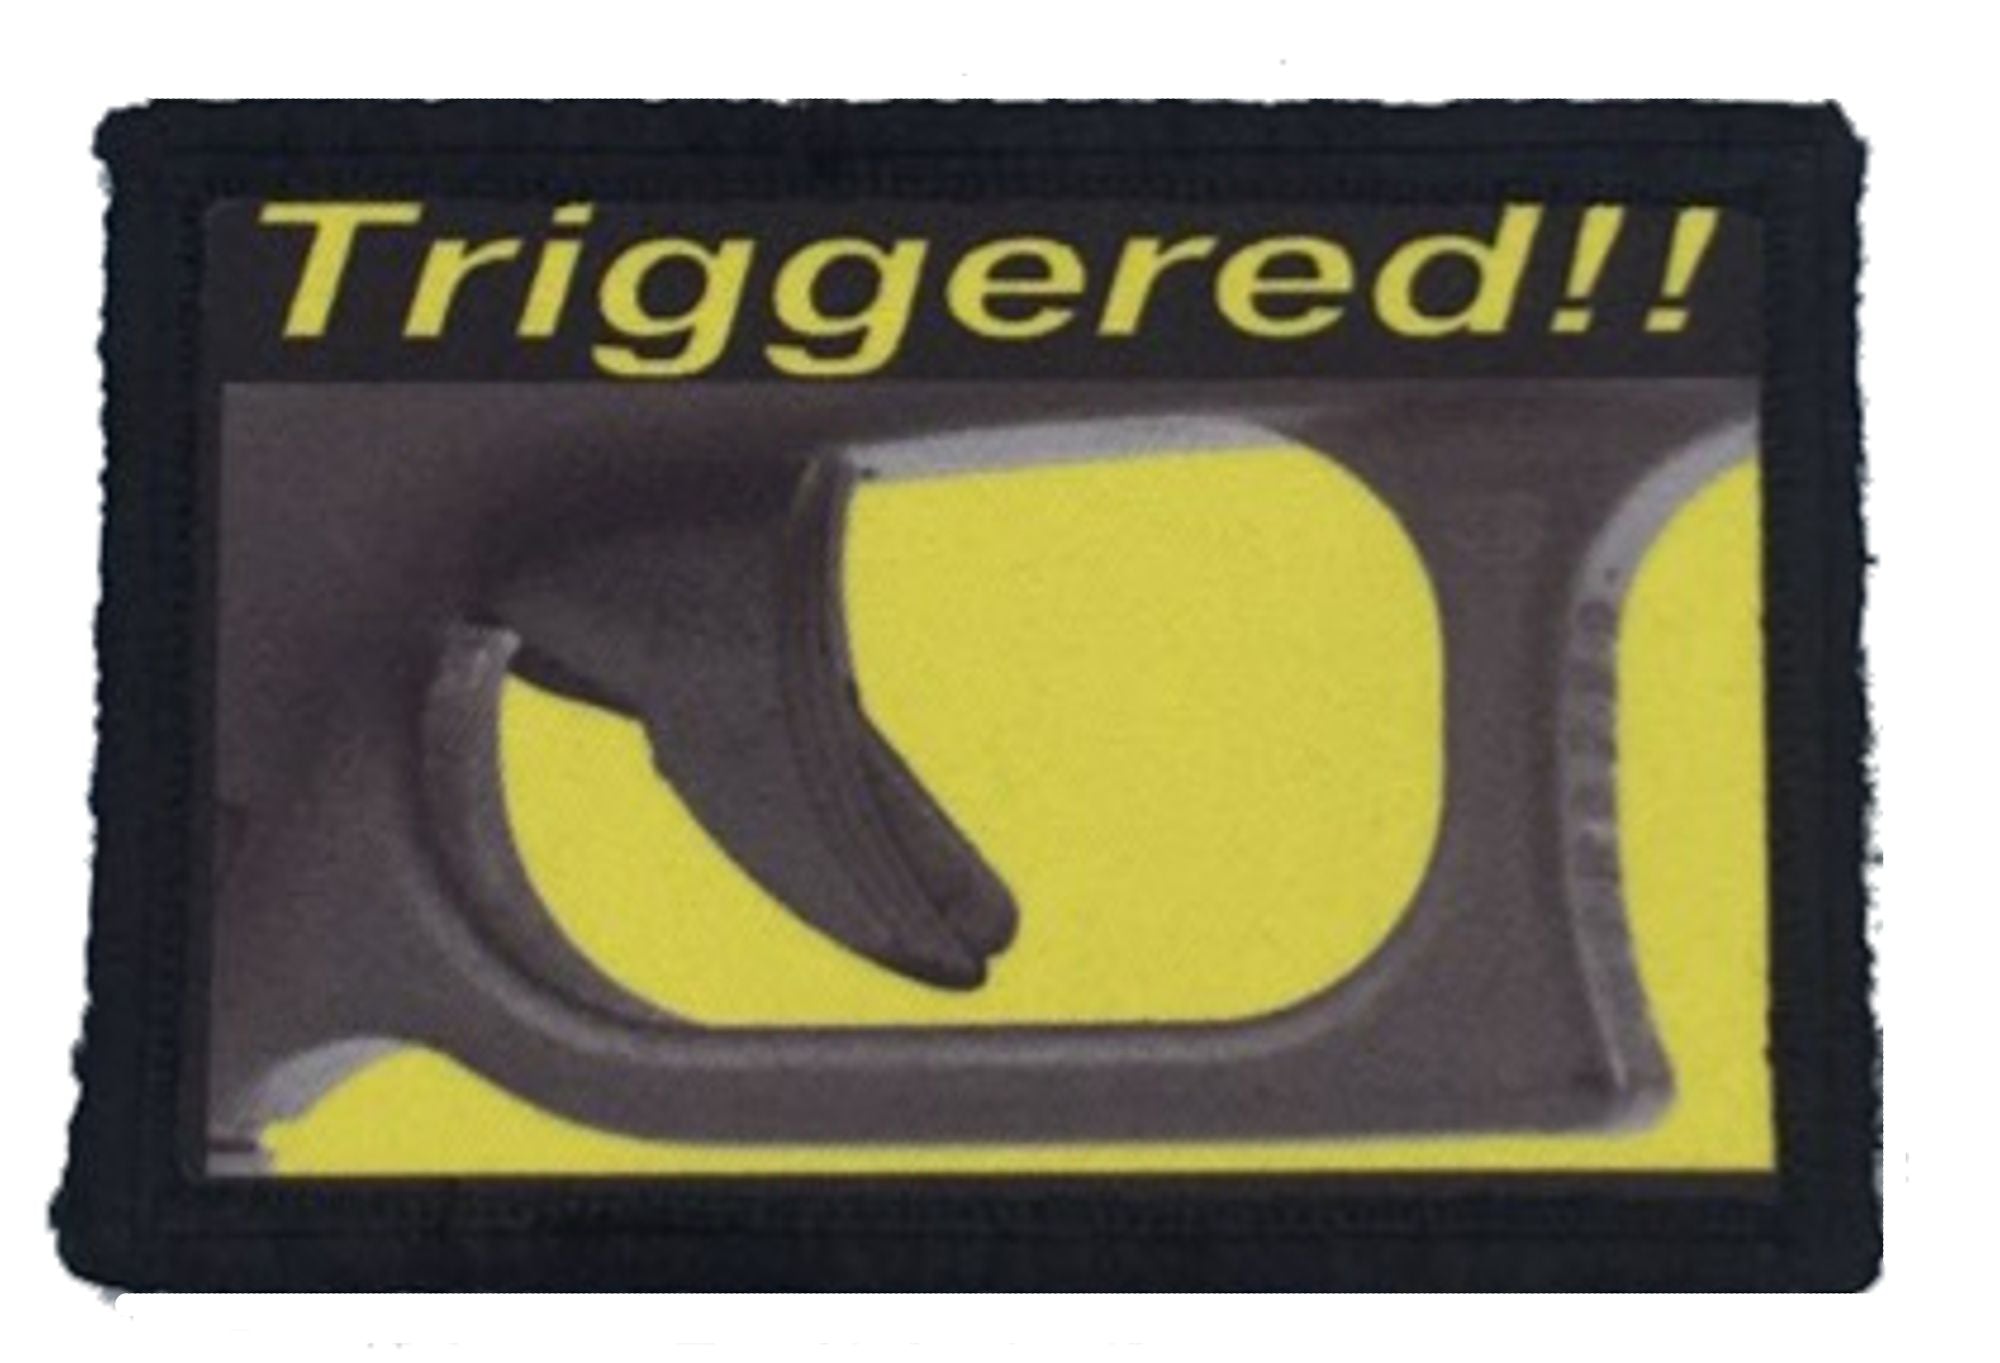 Triggered! Morale Patch Morale Patches Redheaded T Shirts 